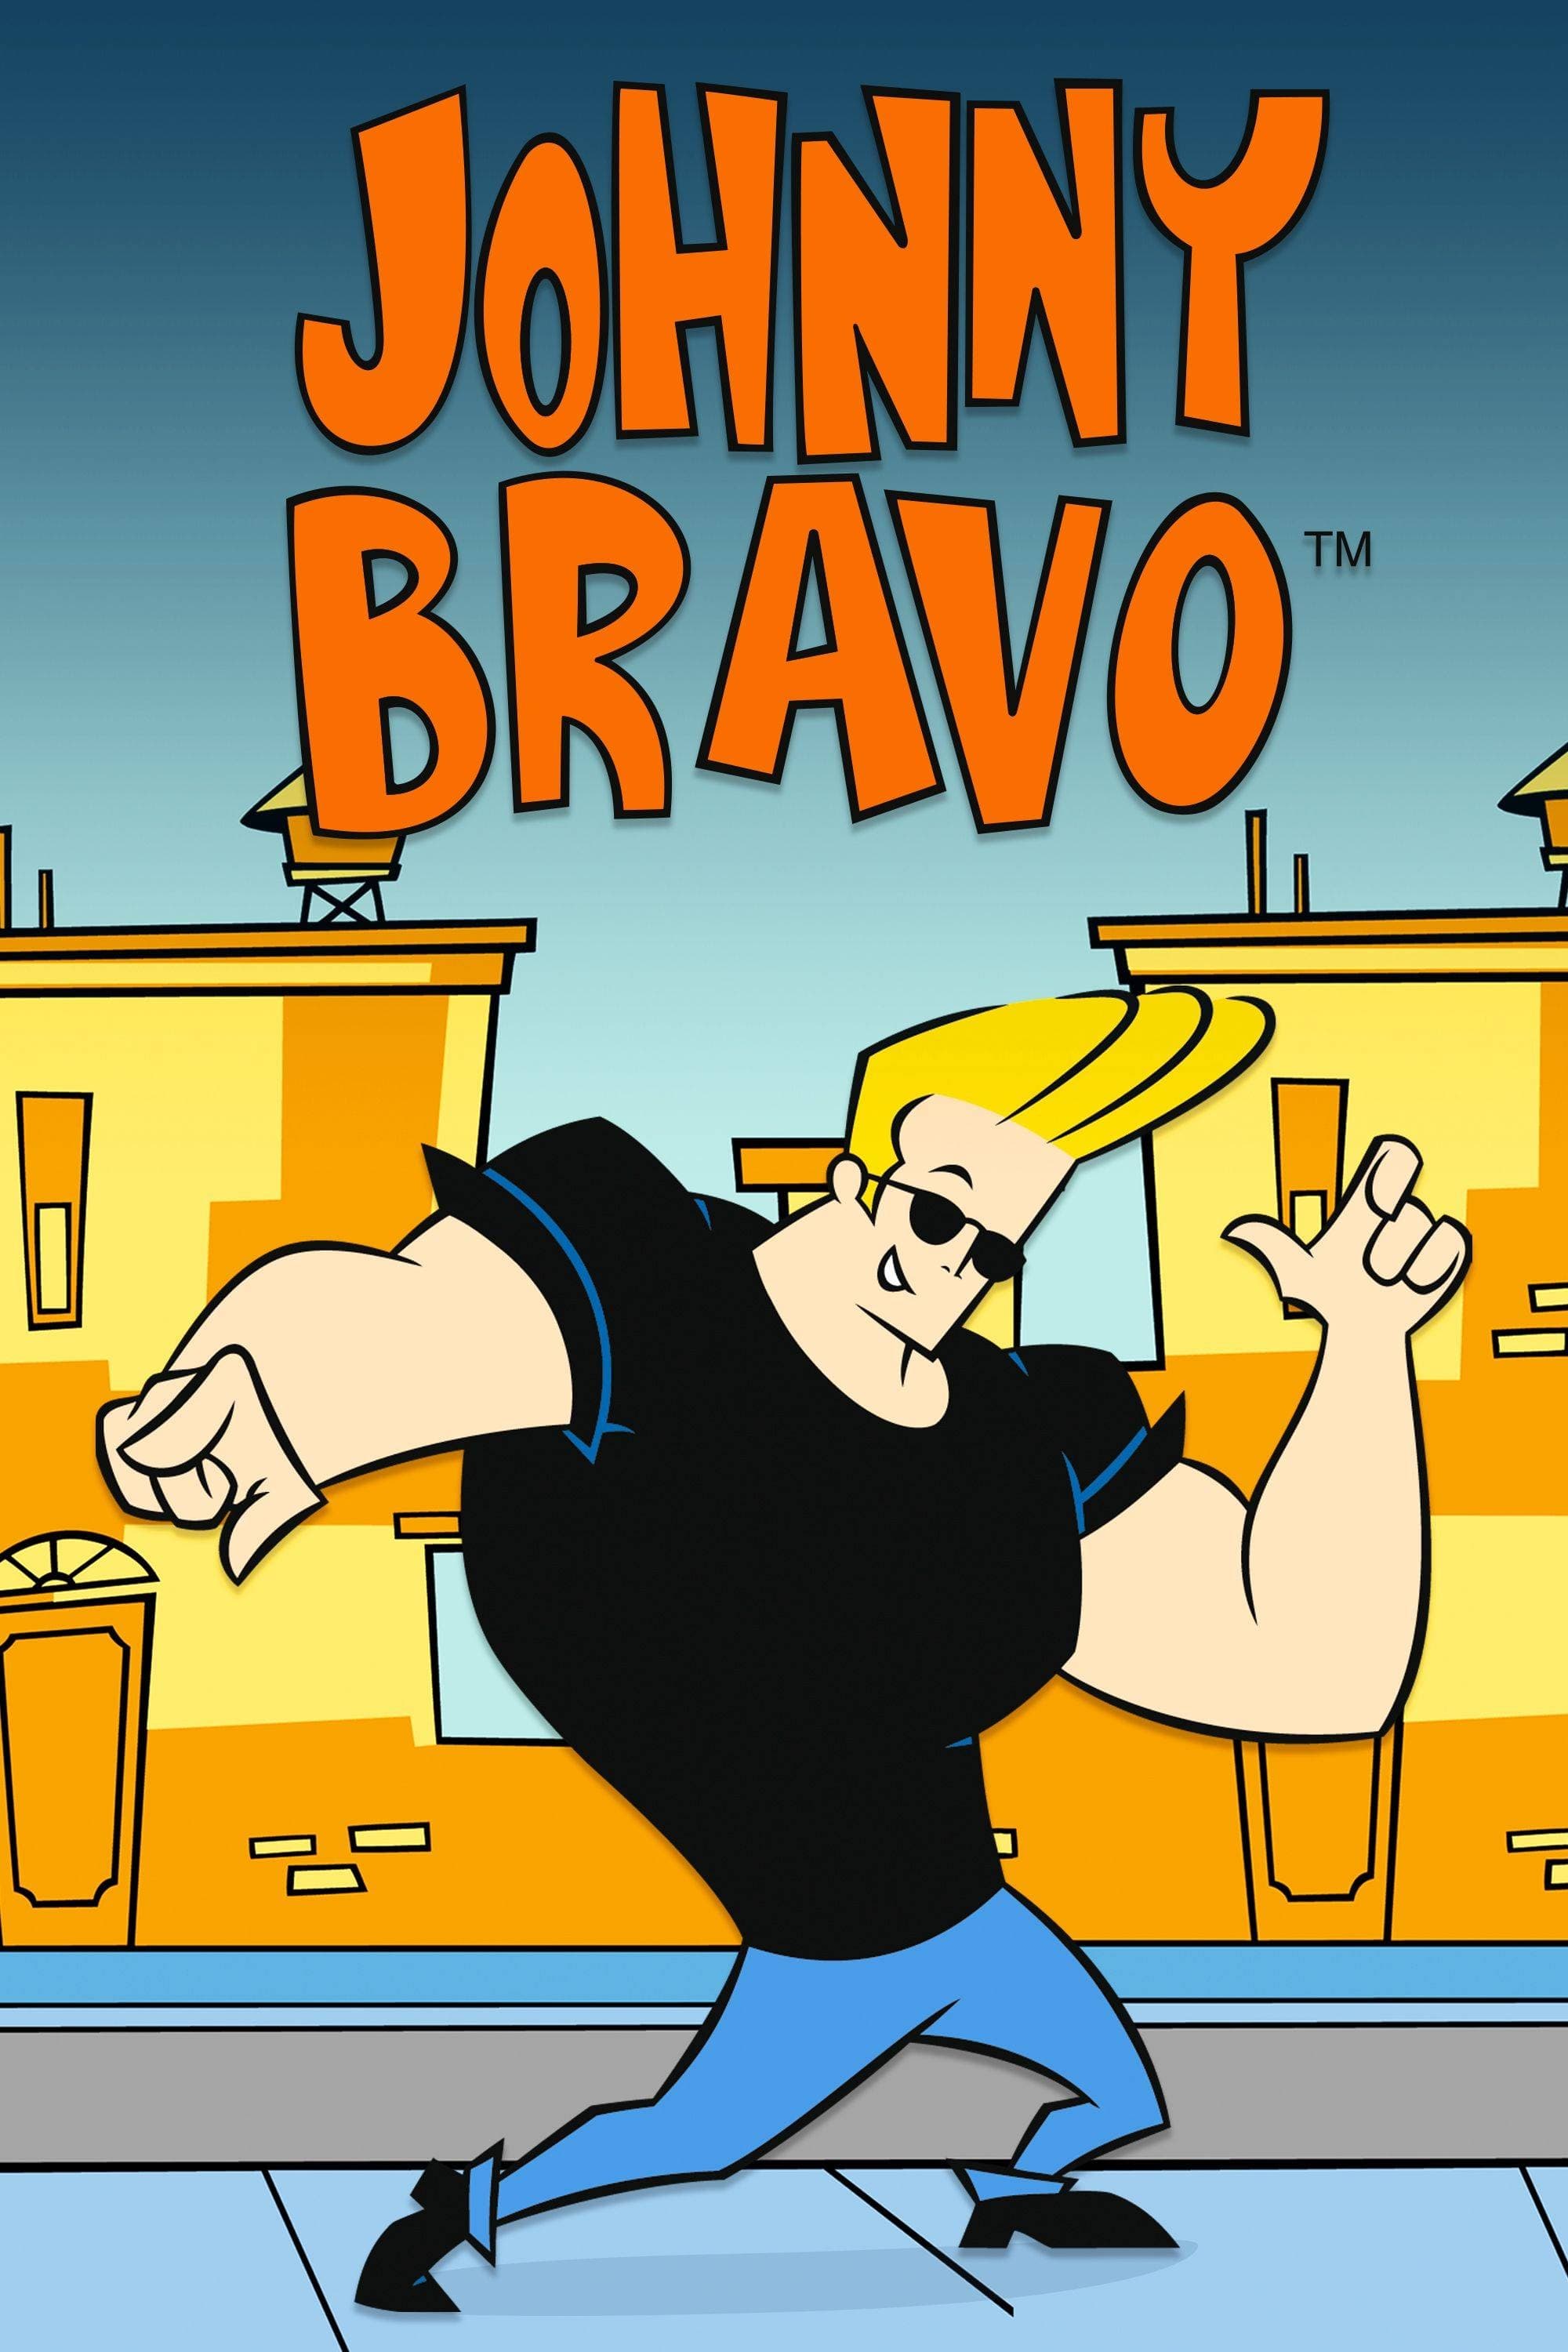 https://static.wikia.nocookie.net/international-entertainment-project/images/7/77/Johnny_Bravo_-_Poster.jpg/revision/latest?cb=20220921015114